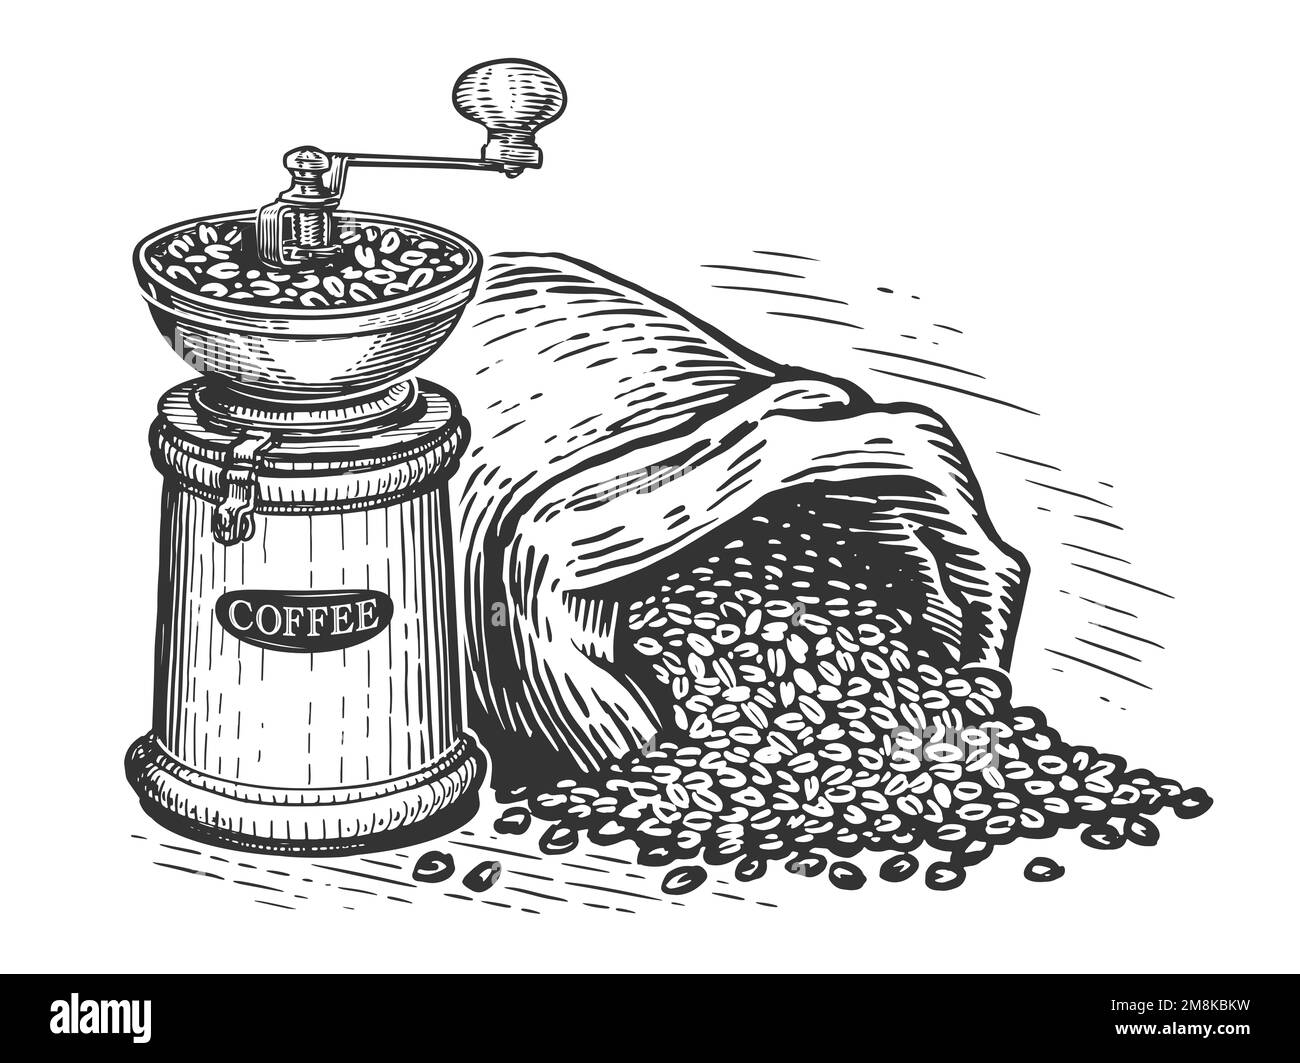 Coffee grinder and bag of coffee beans. Drink concept. Engraved hand drawn sketch vintage illustration Stock Photo